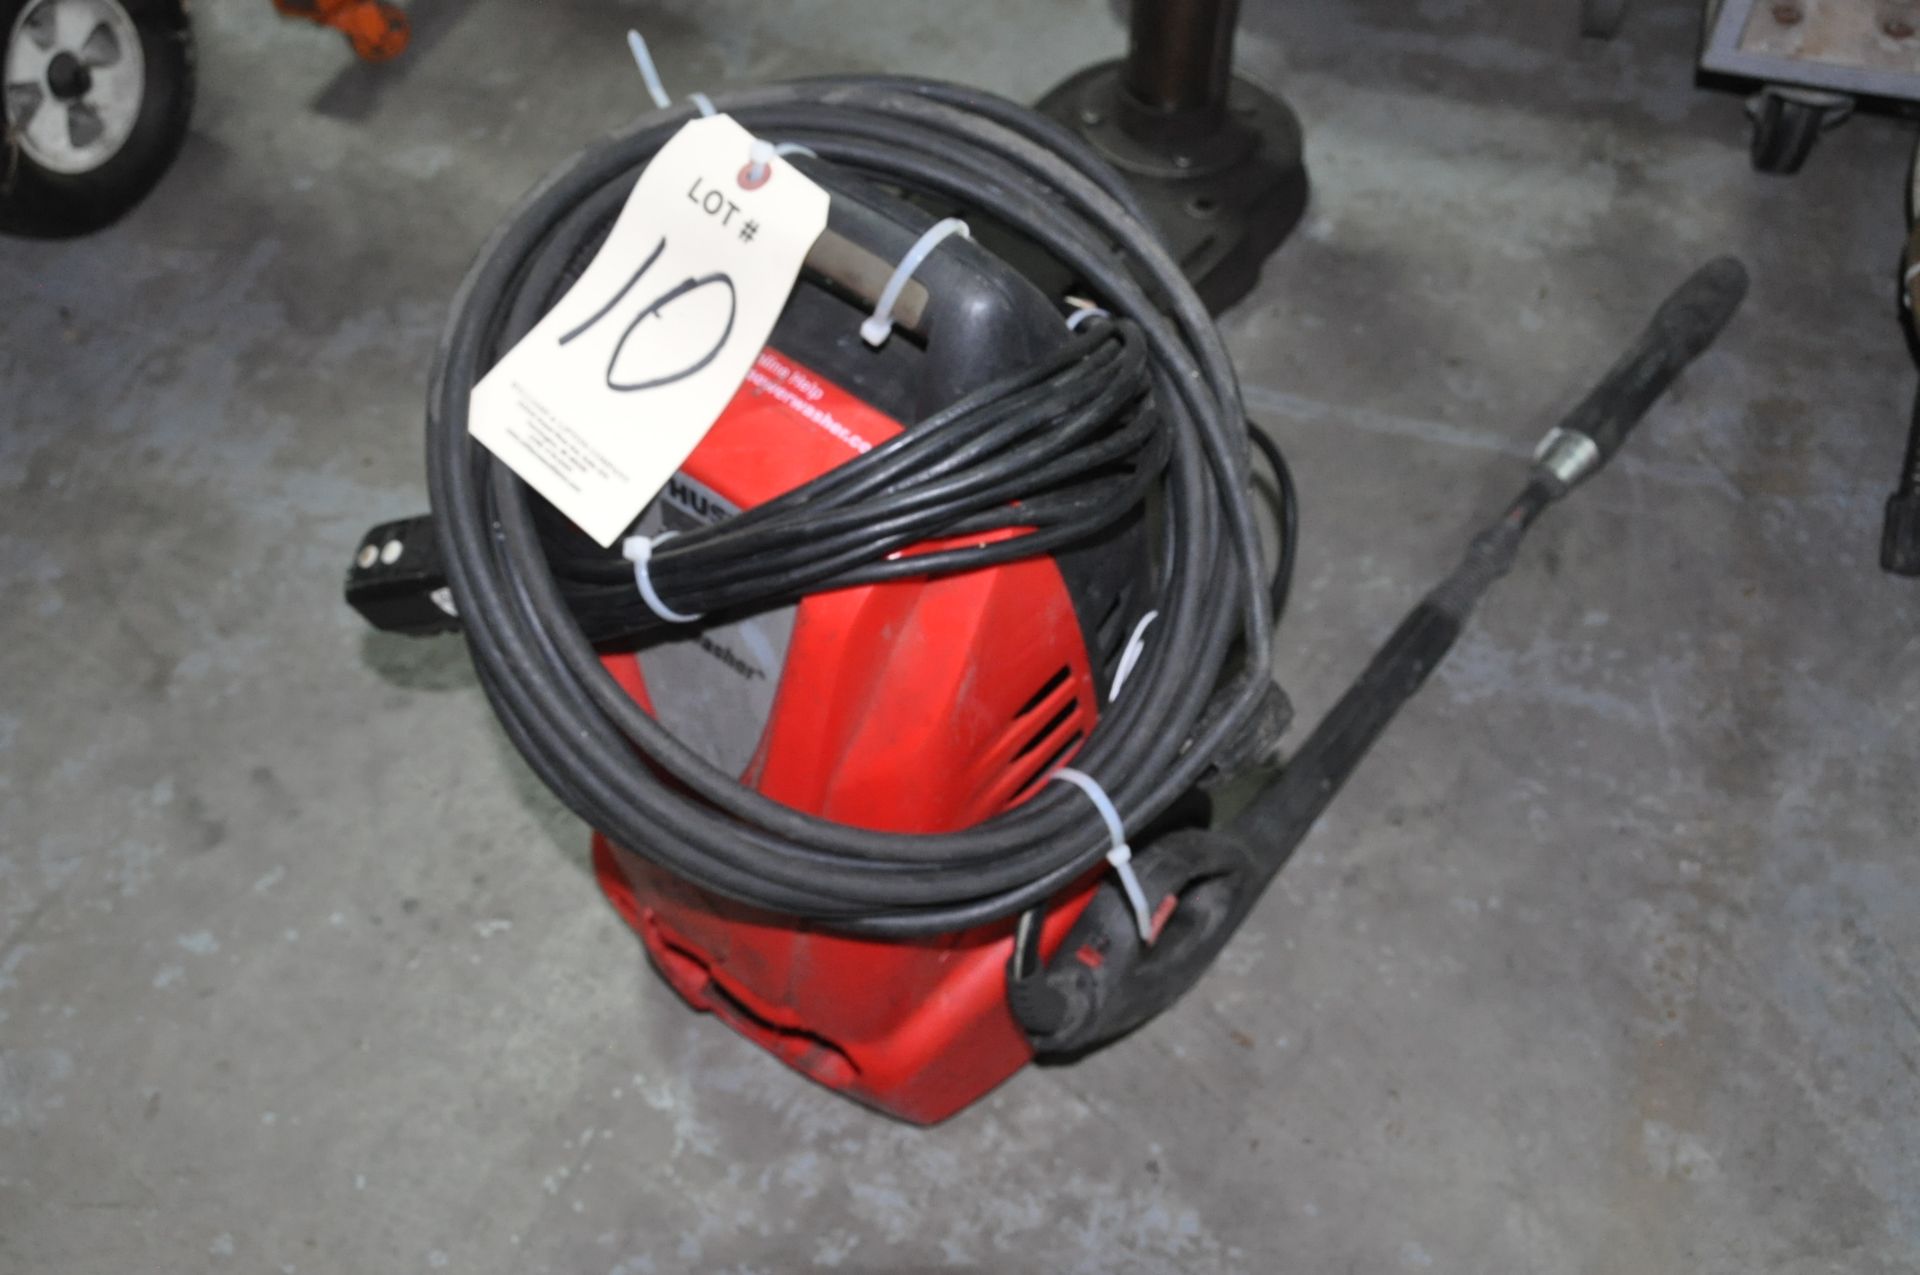 Husky Model H1600 Portable Electric Cold Water Pressure Washer